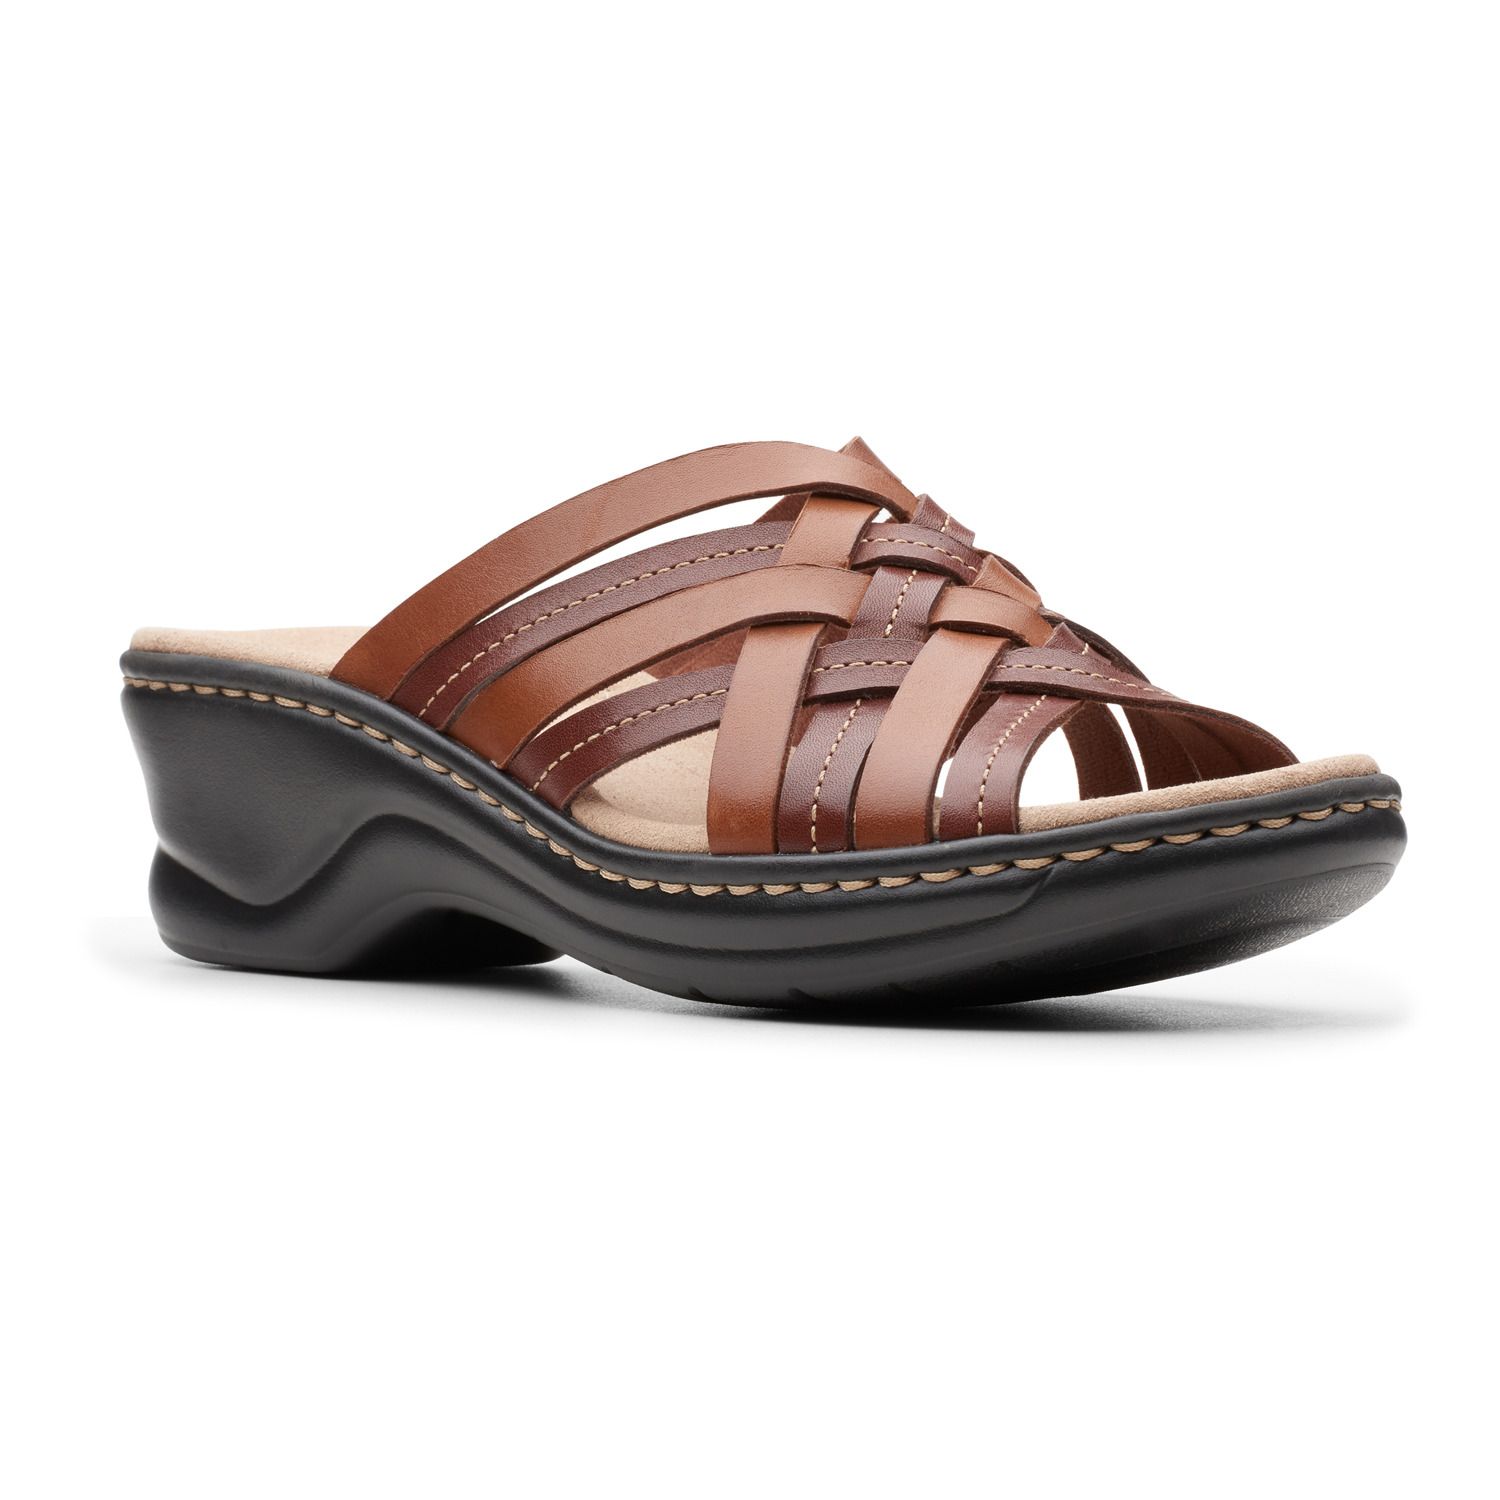 clarks womens sandals clearance